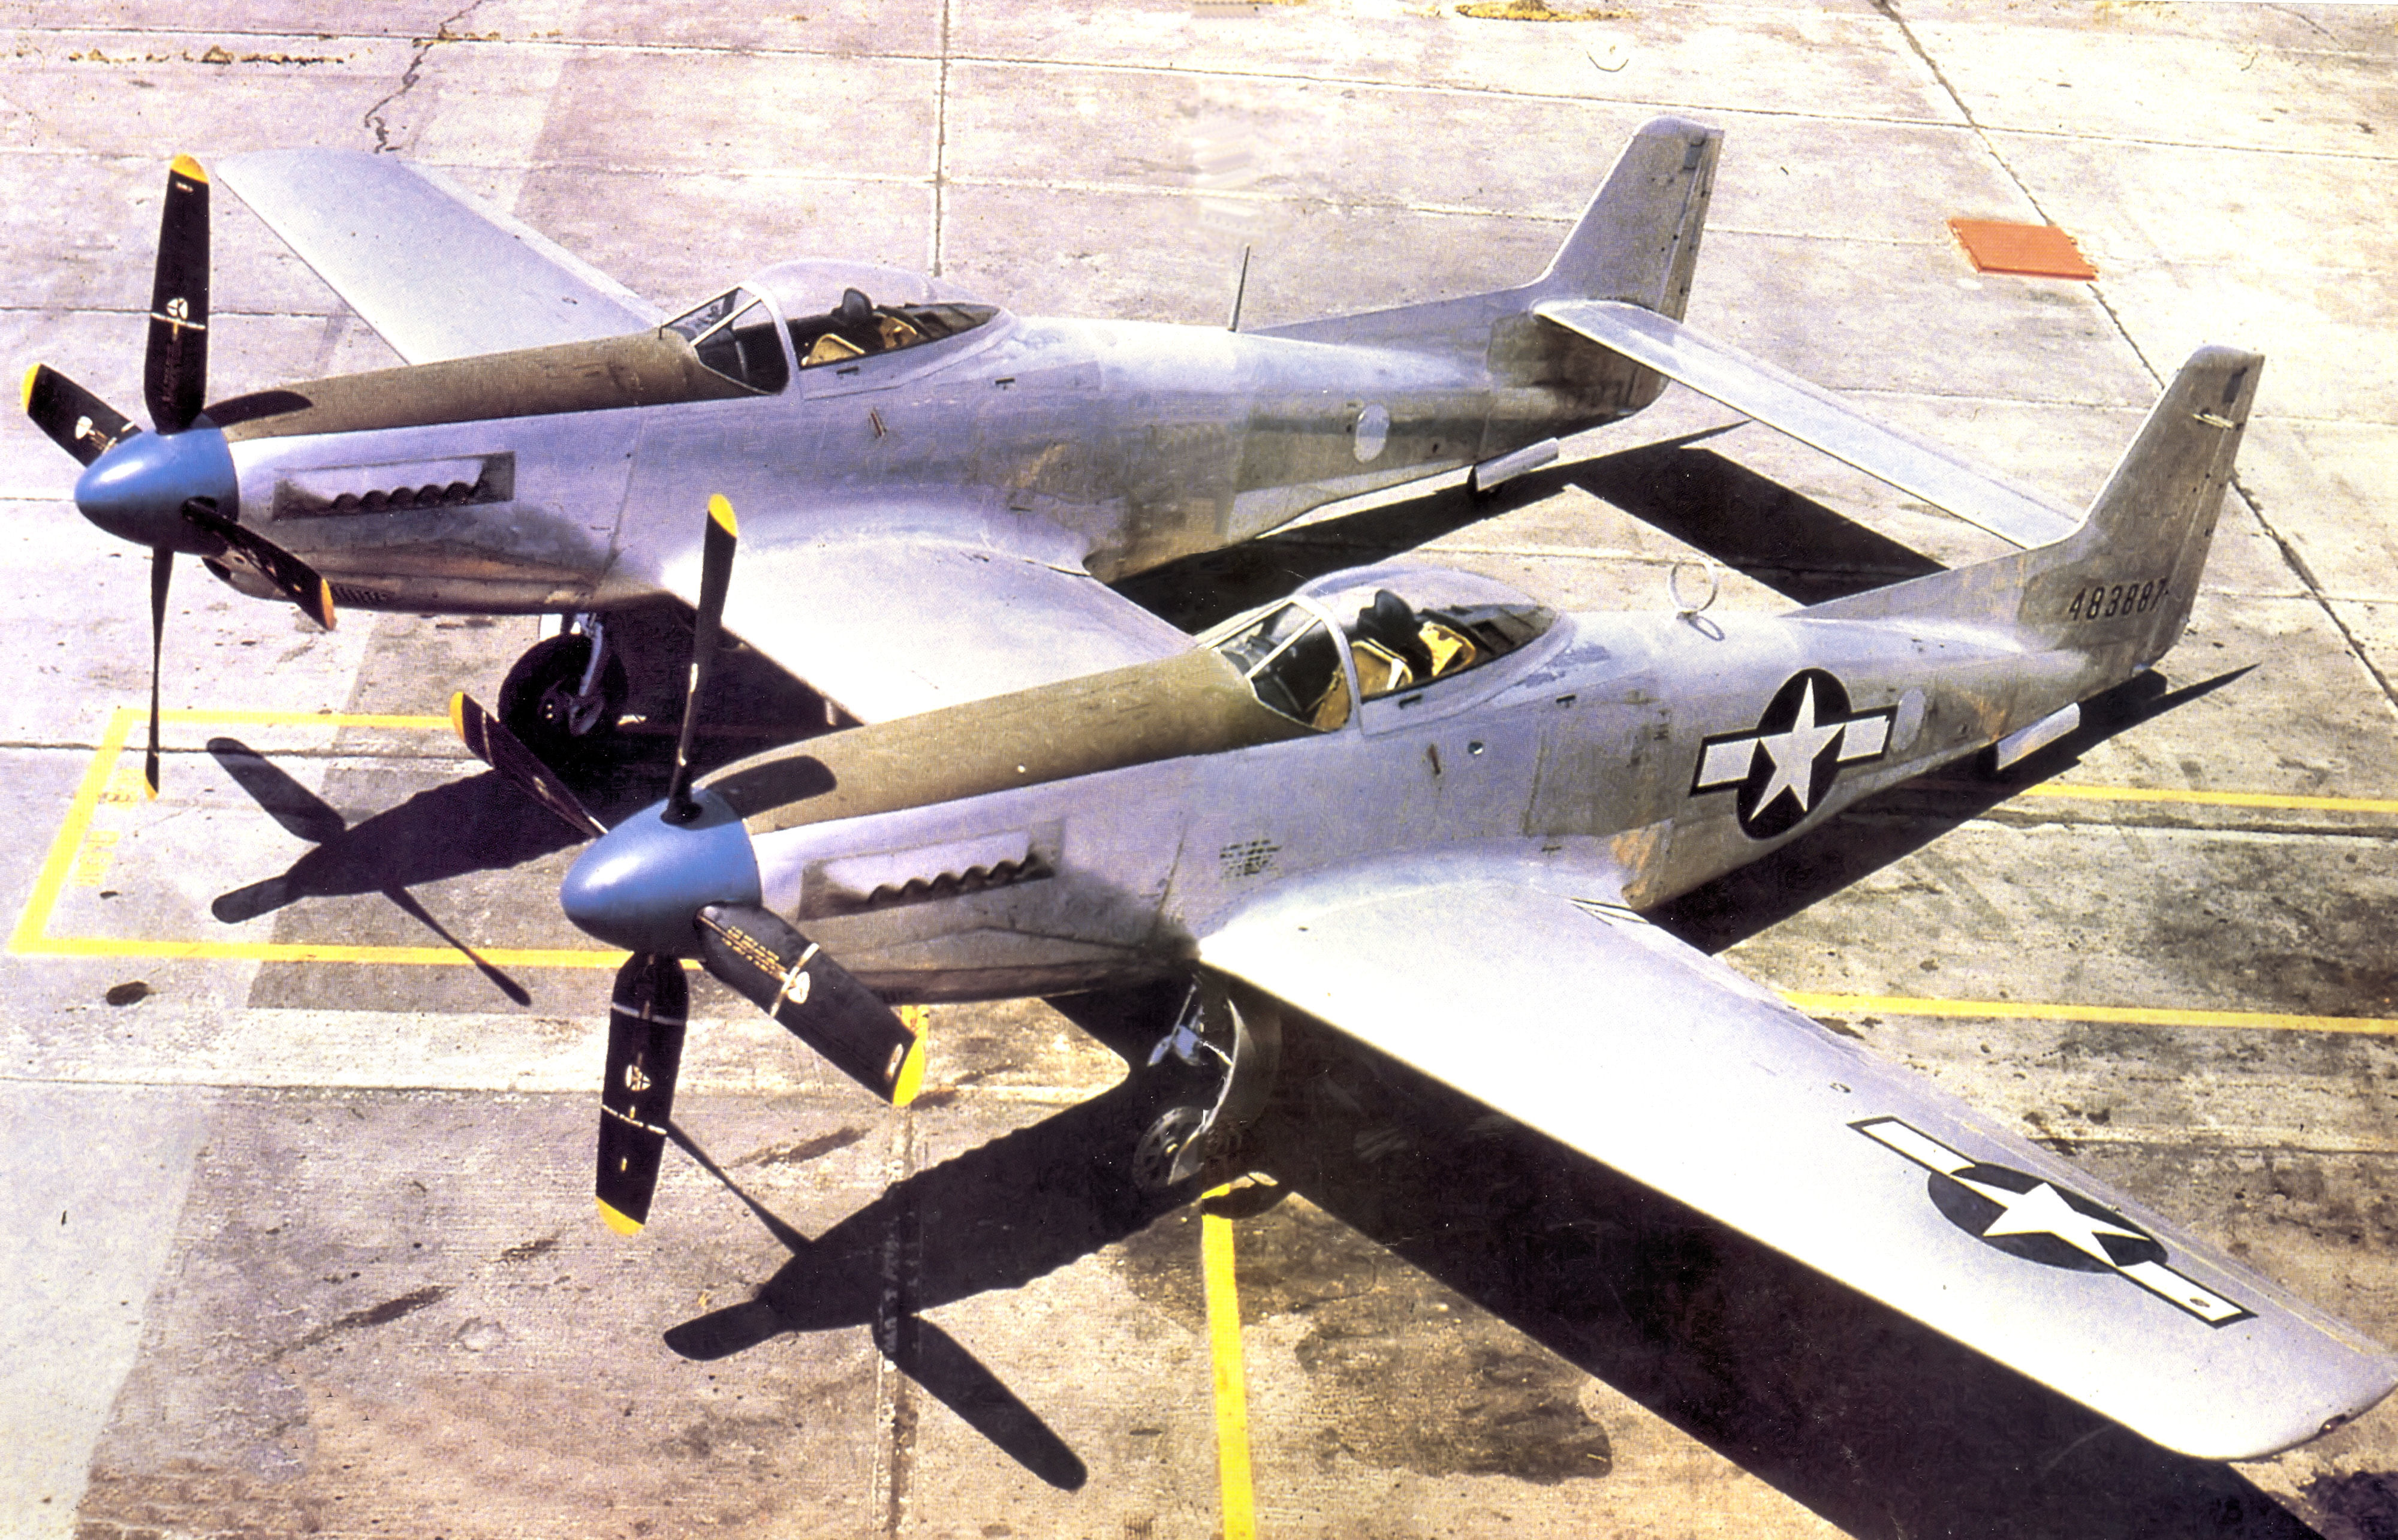 North American XP-82 Twin Mustang 44-83887 in 1945